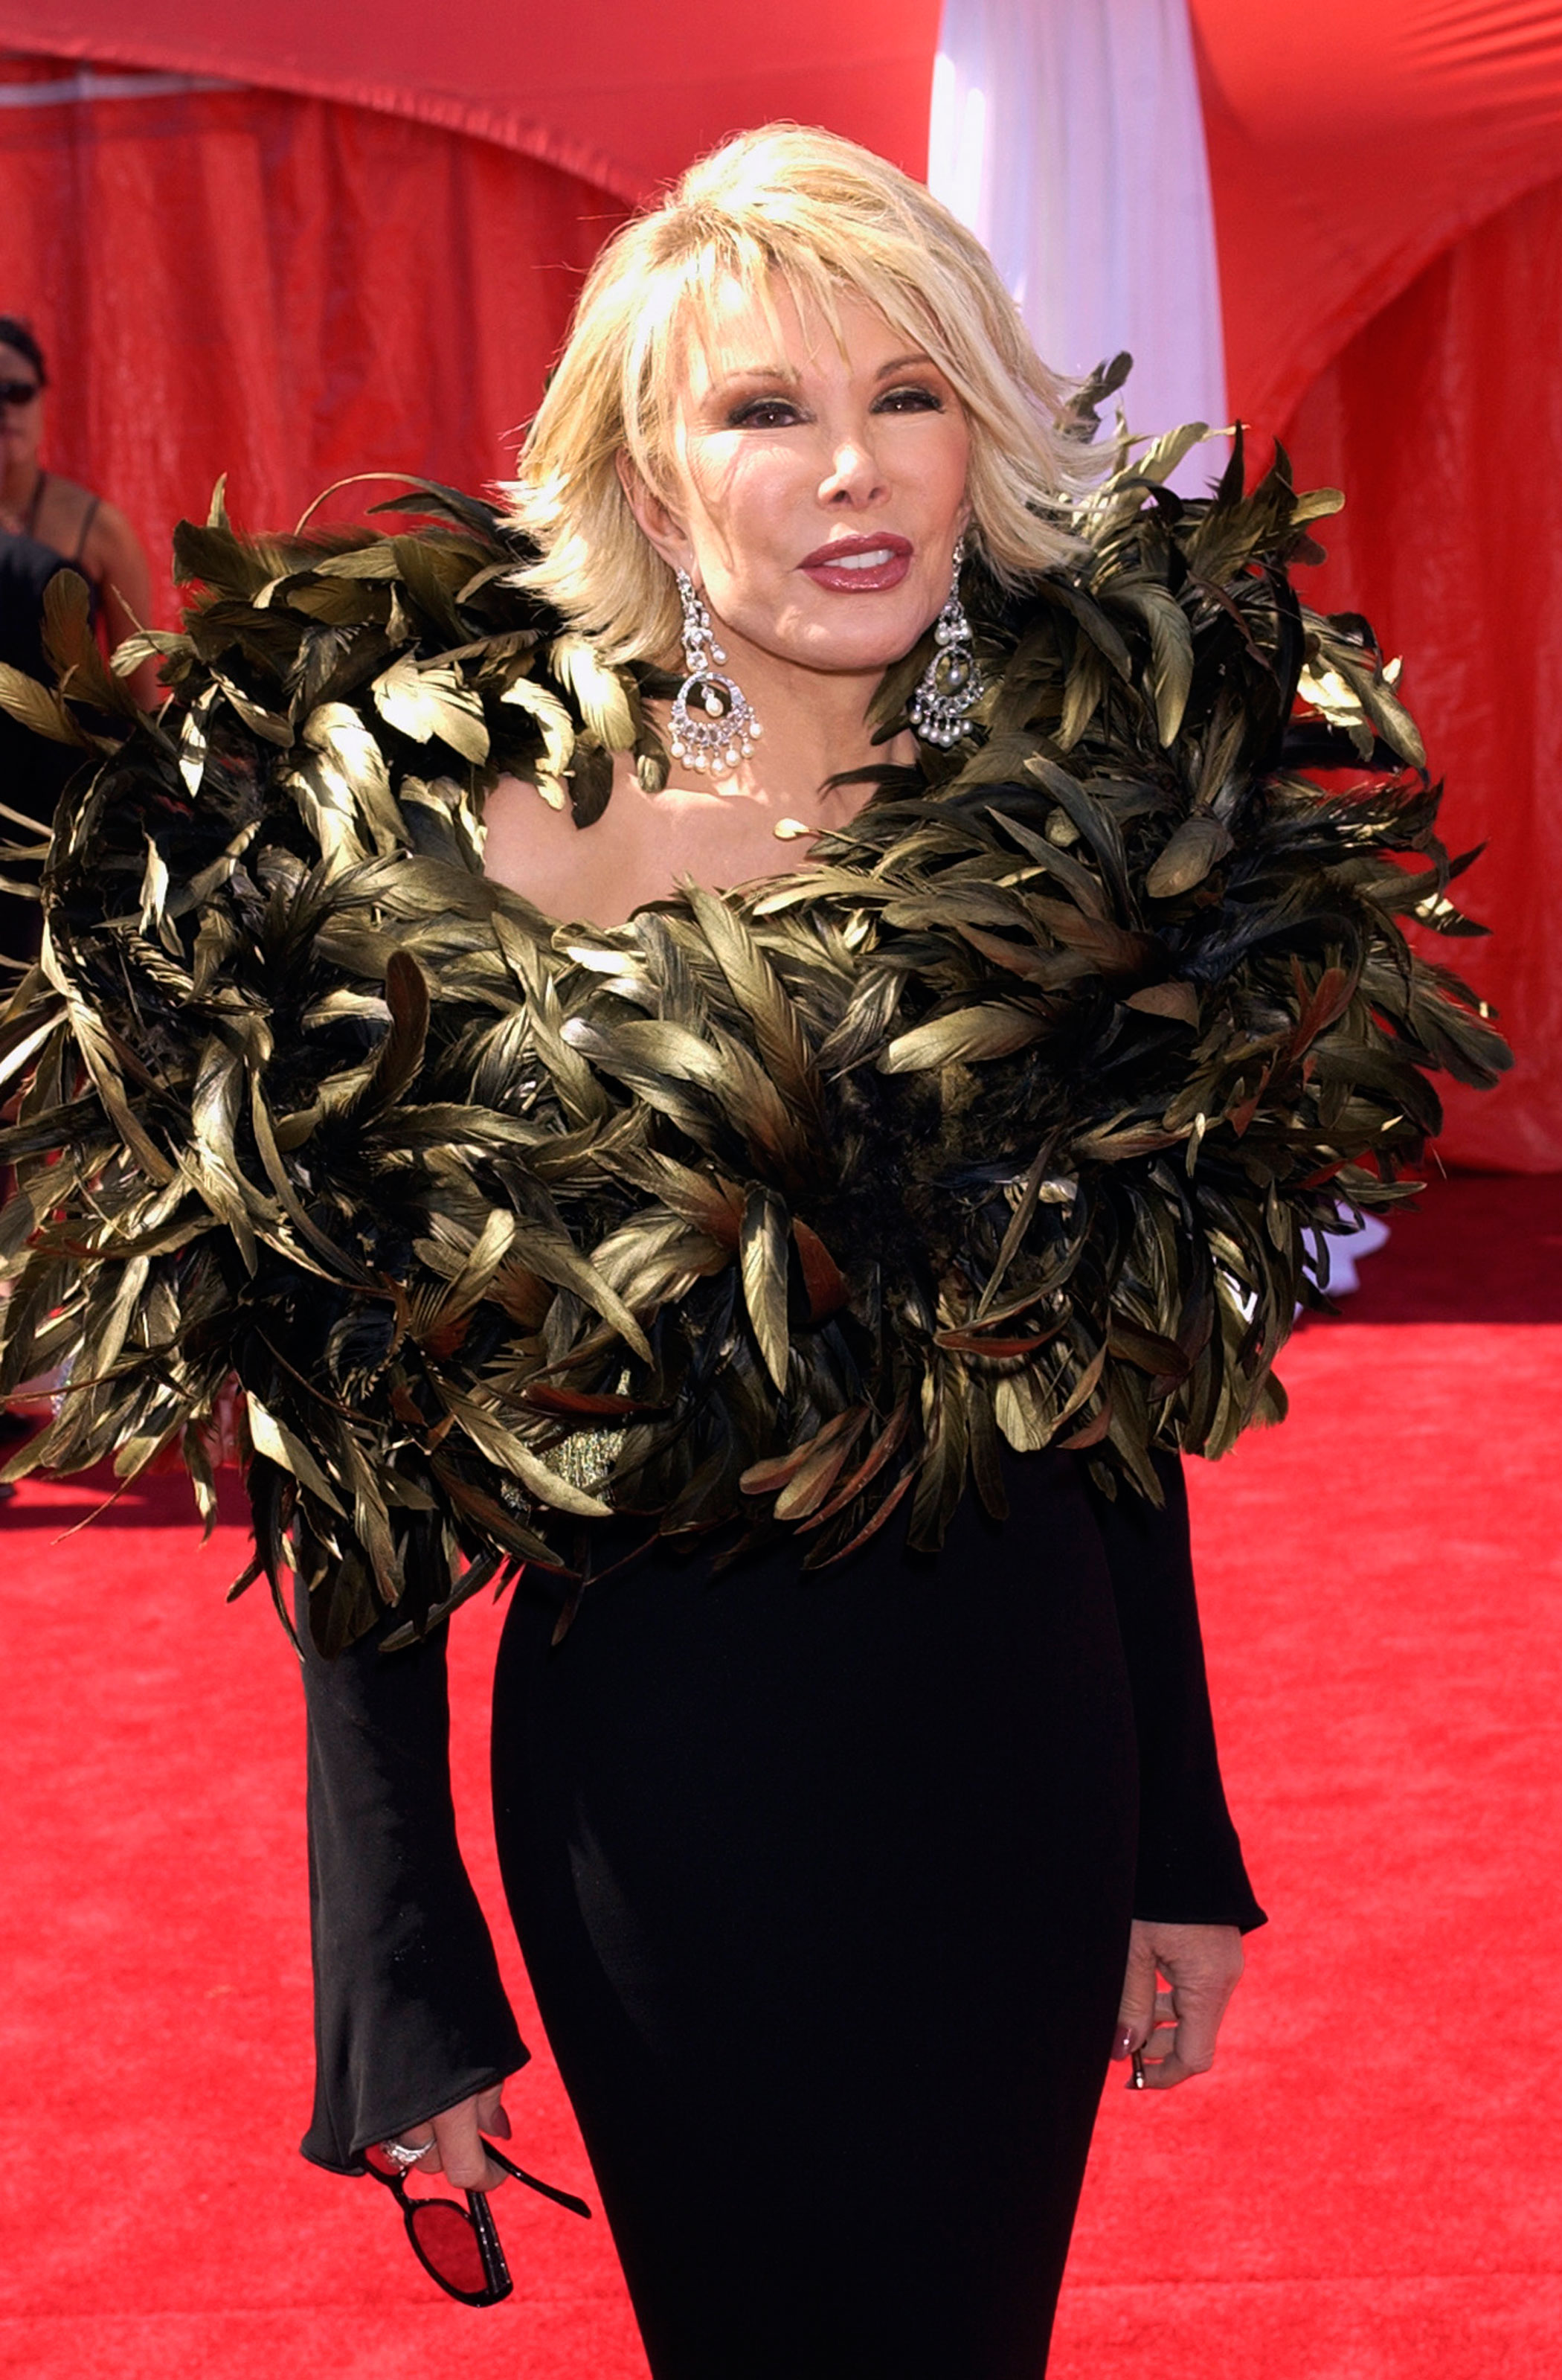 Joan Rivers at the 55th Annual Primetime Emmy Awards on Sept. 4, 2014 in Los Angeles.